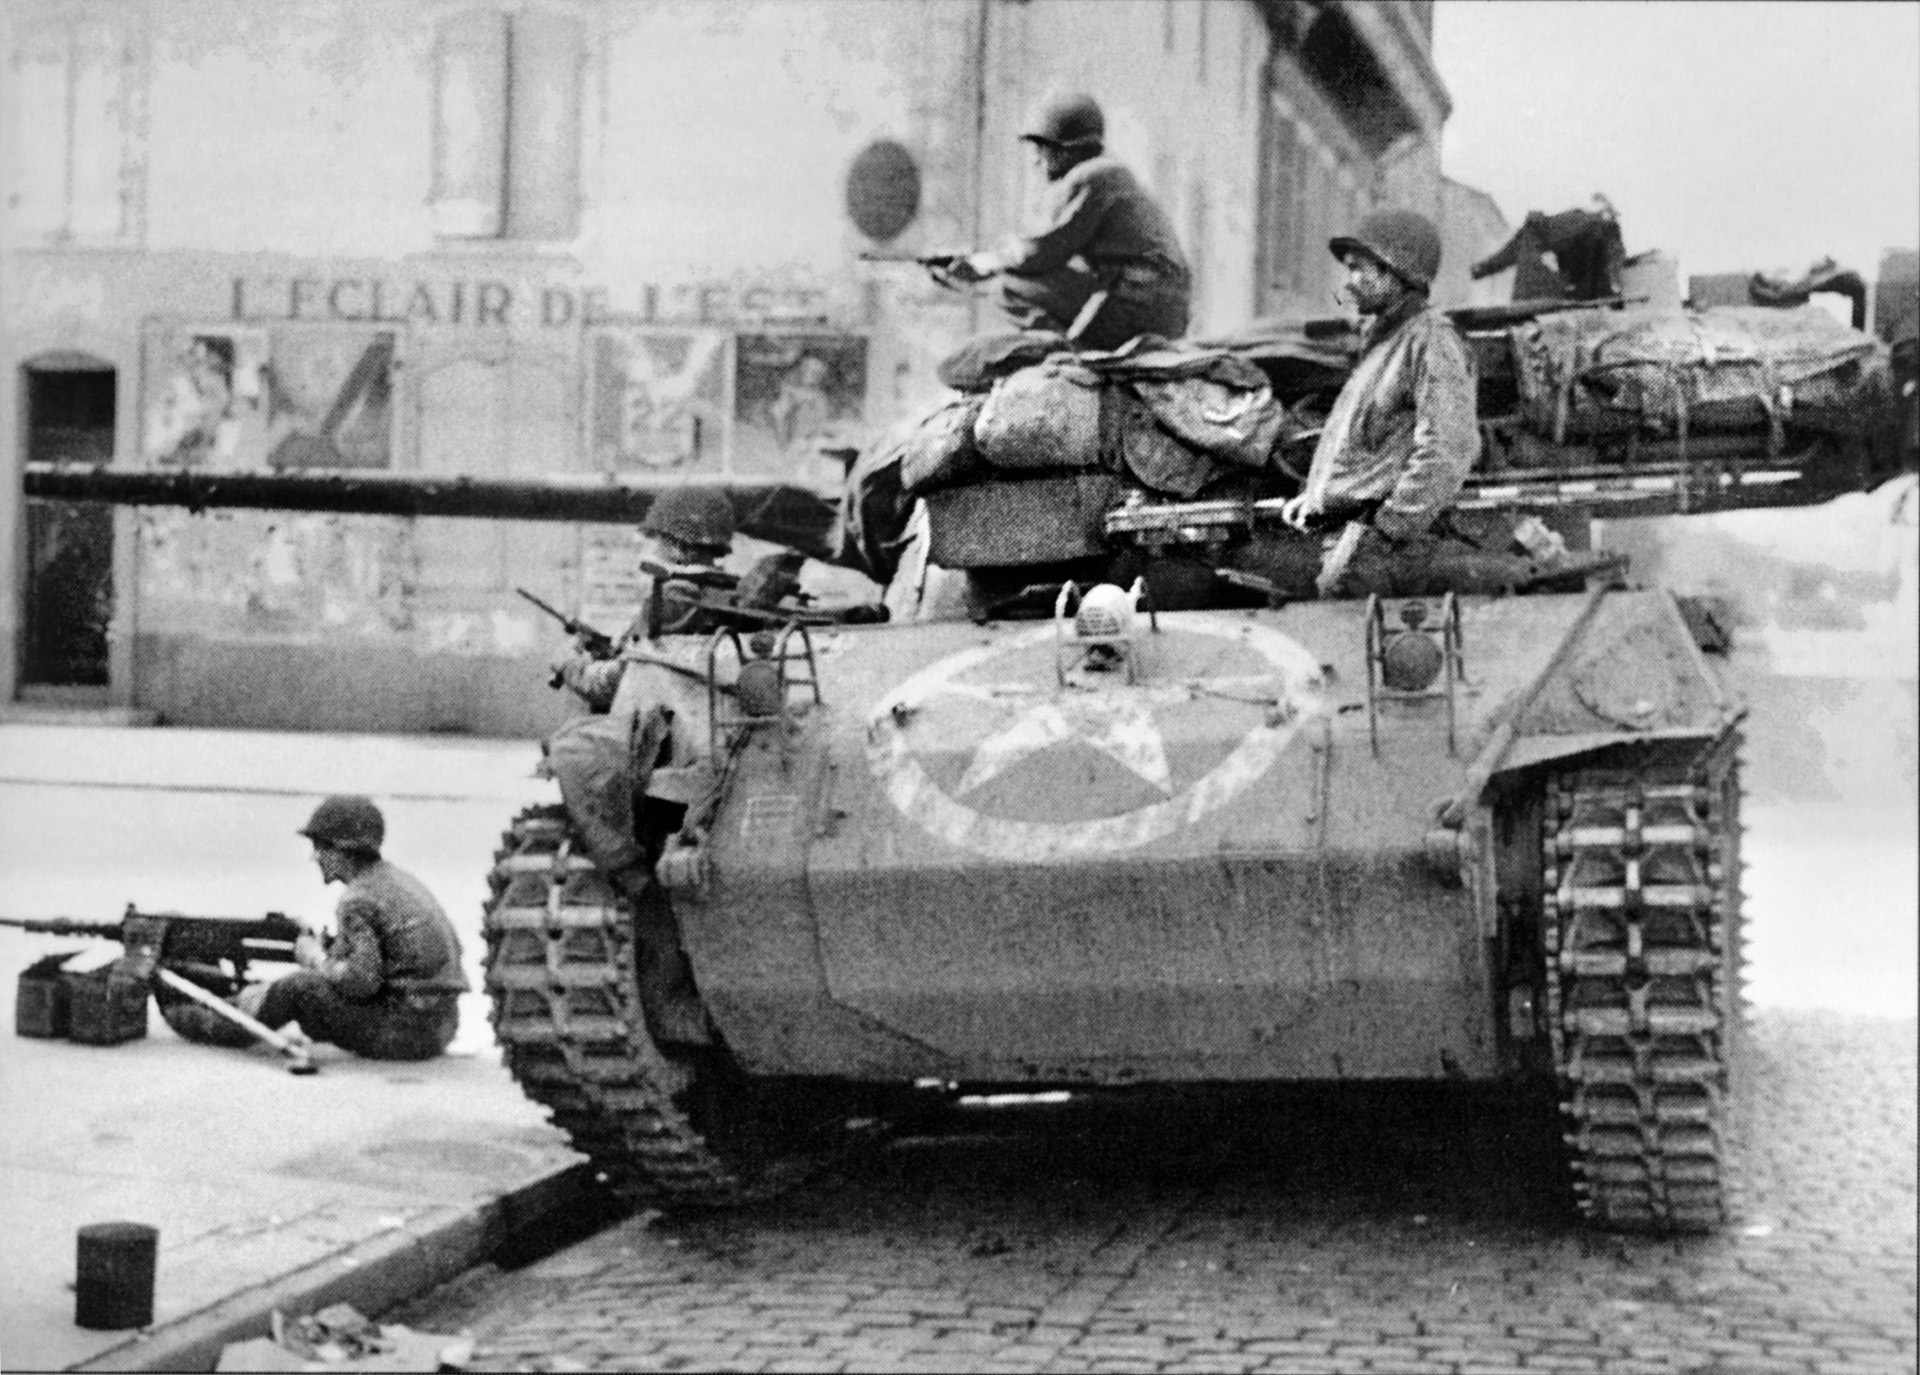 This M18 Hellcat tank destroyer of the U.S. 603rd Tank Destroyer Battalion has taken up a defensive position in the streets of Luneville on September 18, 1944. An infantryman has also positioned his .50-caliber machine gun toward the expected approach of the attacking Germans, while another soldier stands ready with his M-3 ‘Grease Gun,’ a .45-caliber submachine gun.